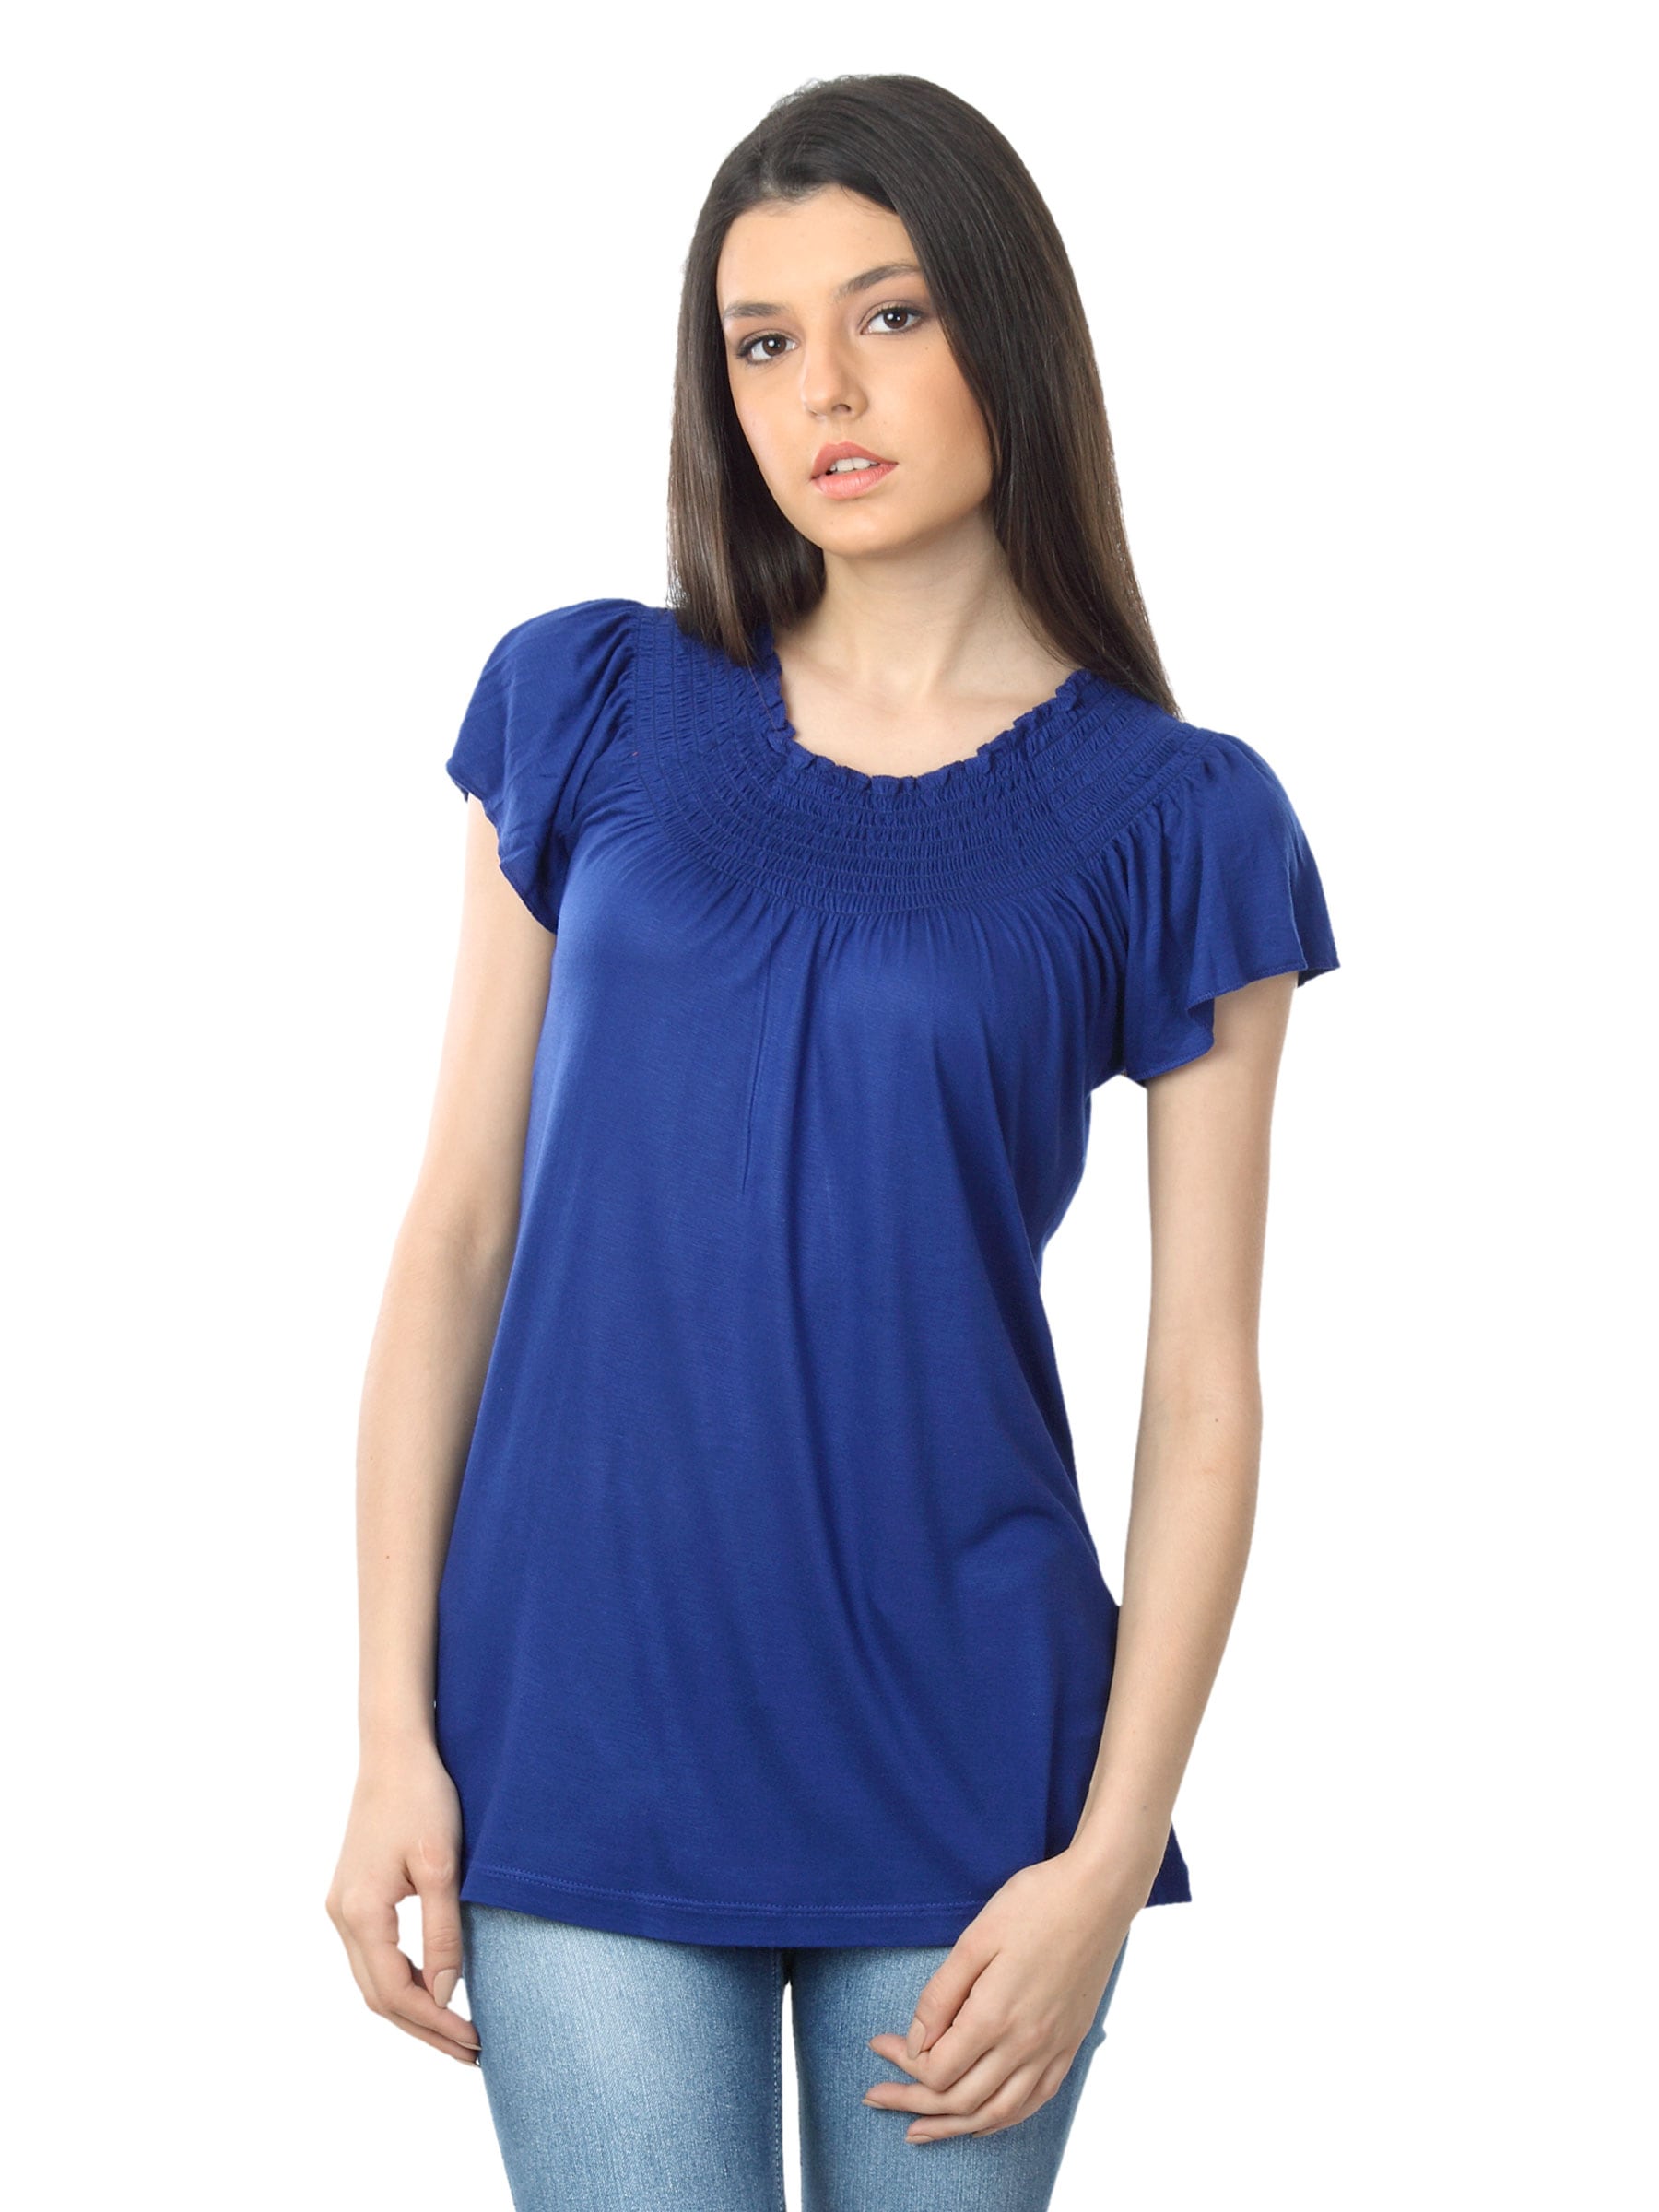 Scullers For Her Navy Blue Top